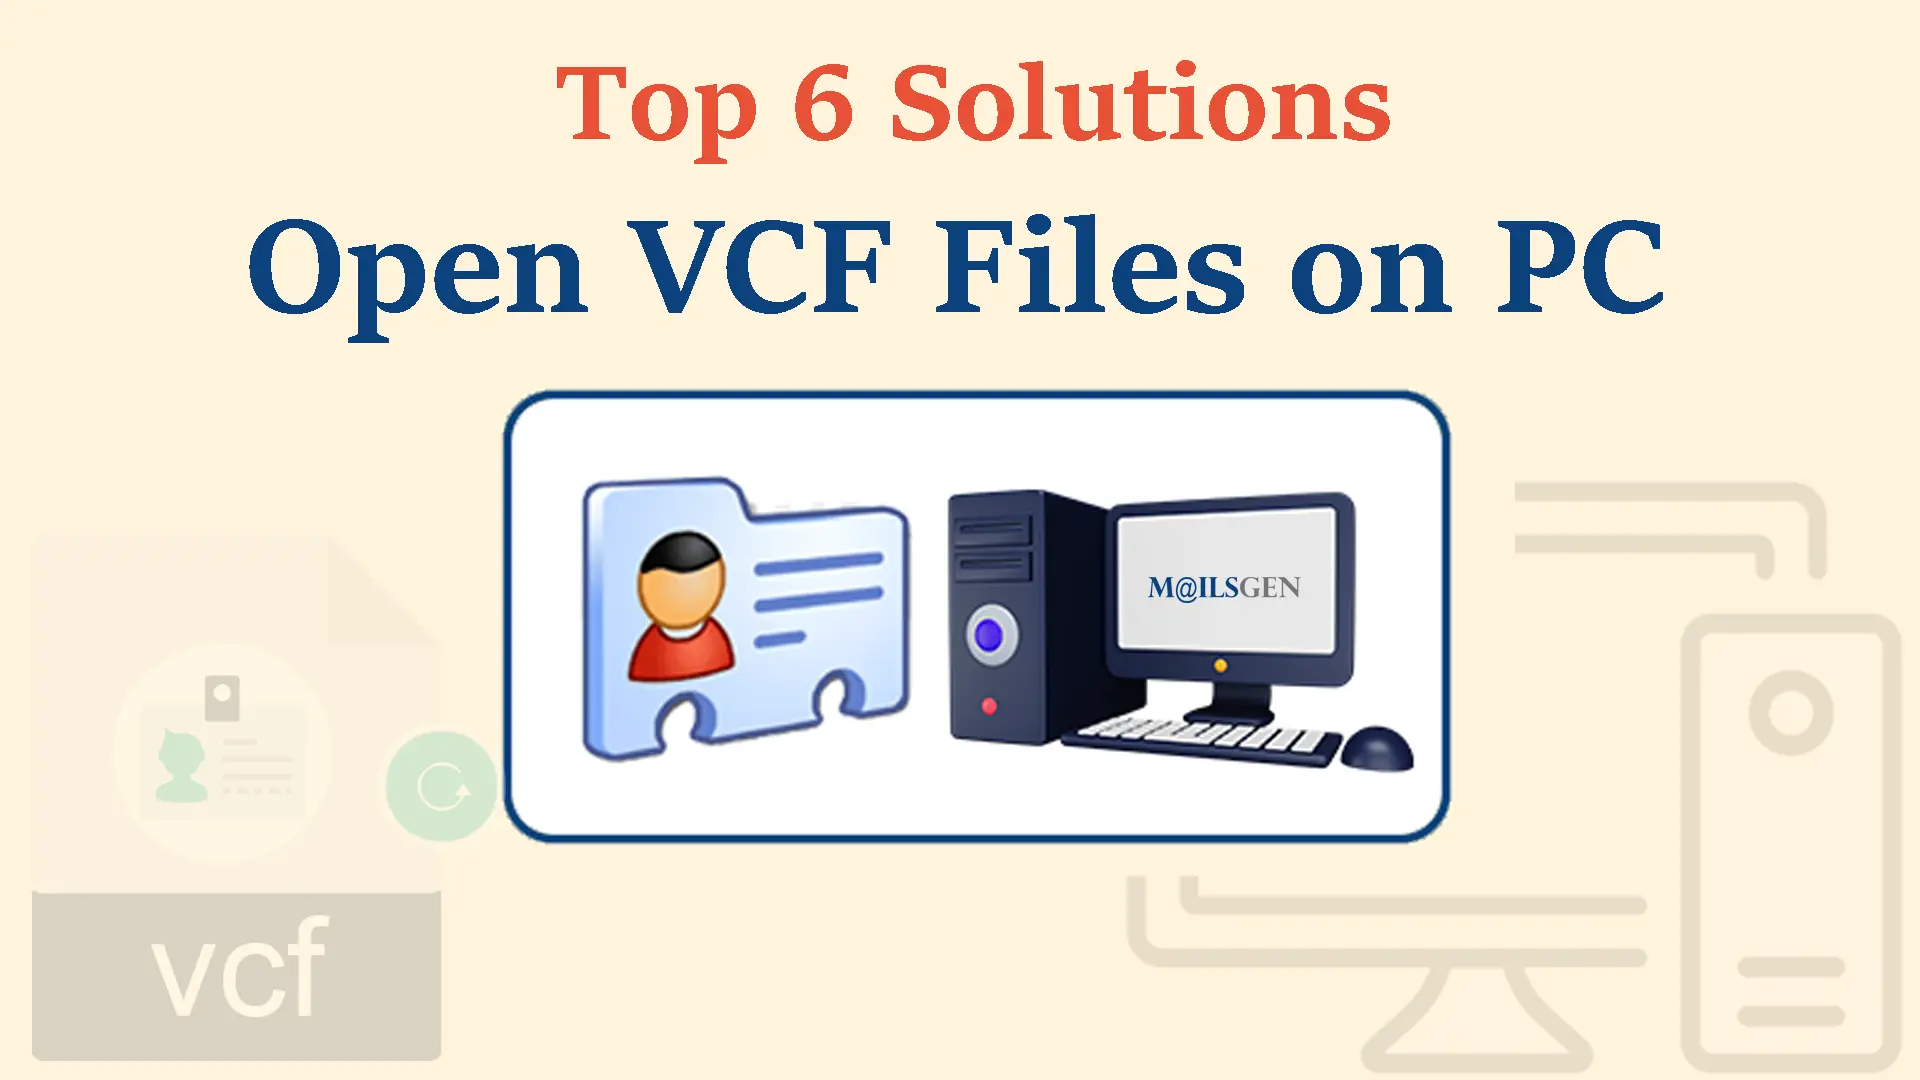 Easily Open VCF Files on PC with Top 6 Solutions